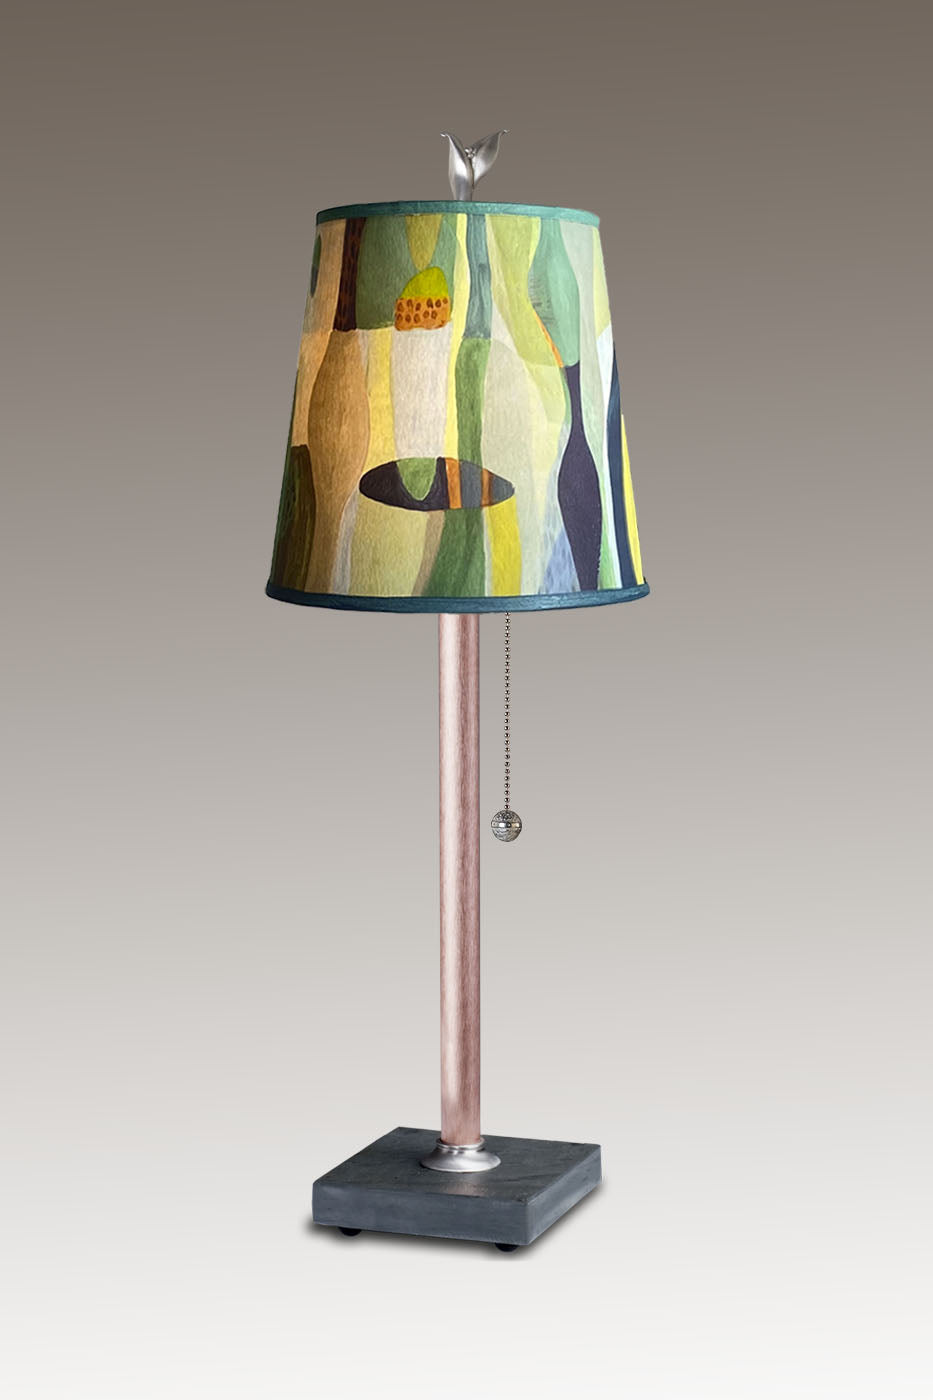 Janna Ugone & Co Table Lamp Copper Table Lamp with Small Drum Shade in Riviera in Citrus